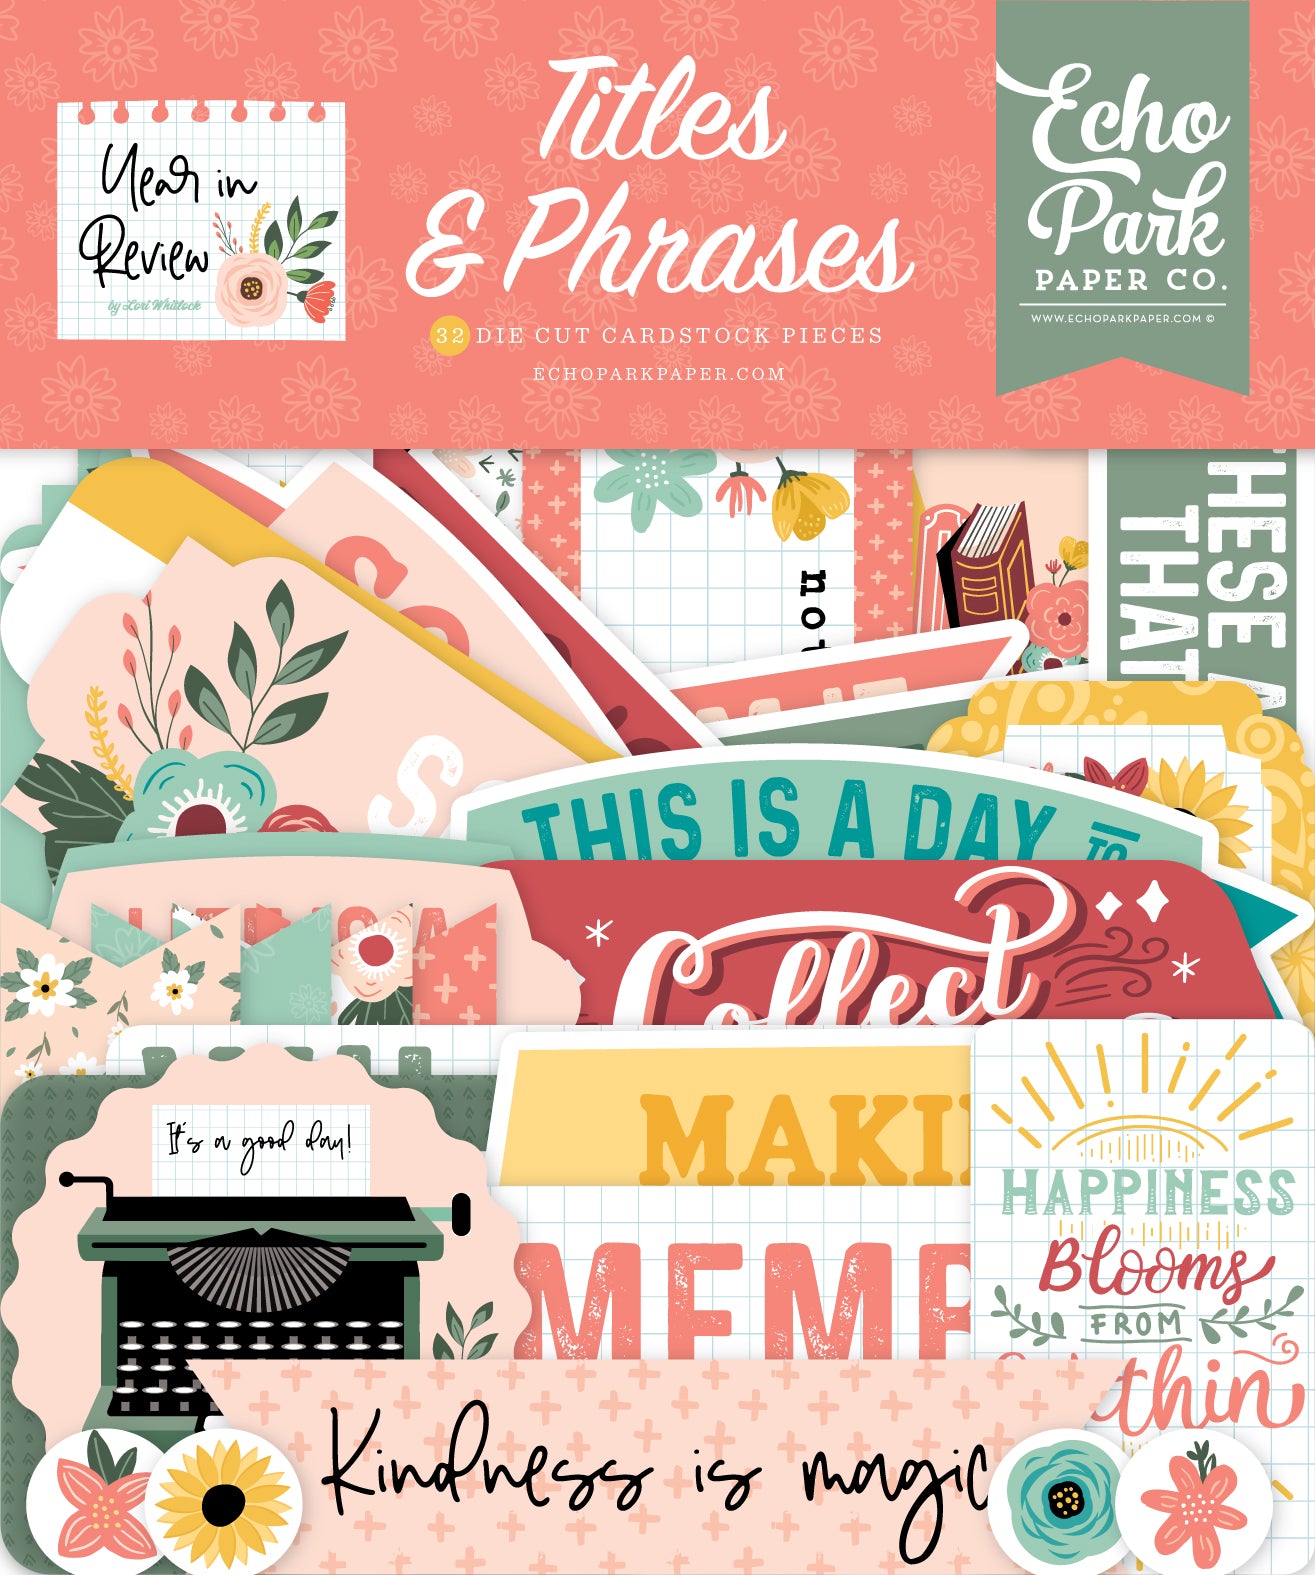 Year In Review Collection 5 x 5 Scrapbook Titles & Phrases by Echo Park Paper